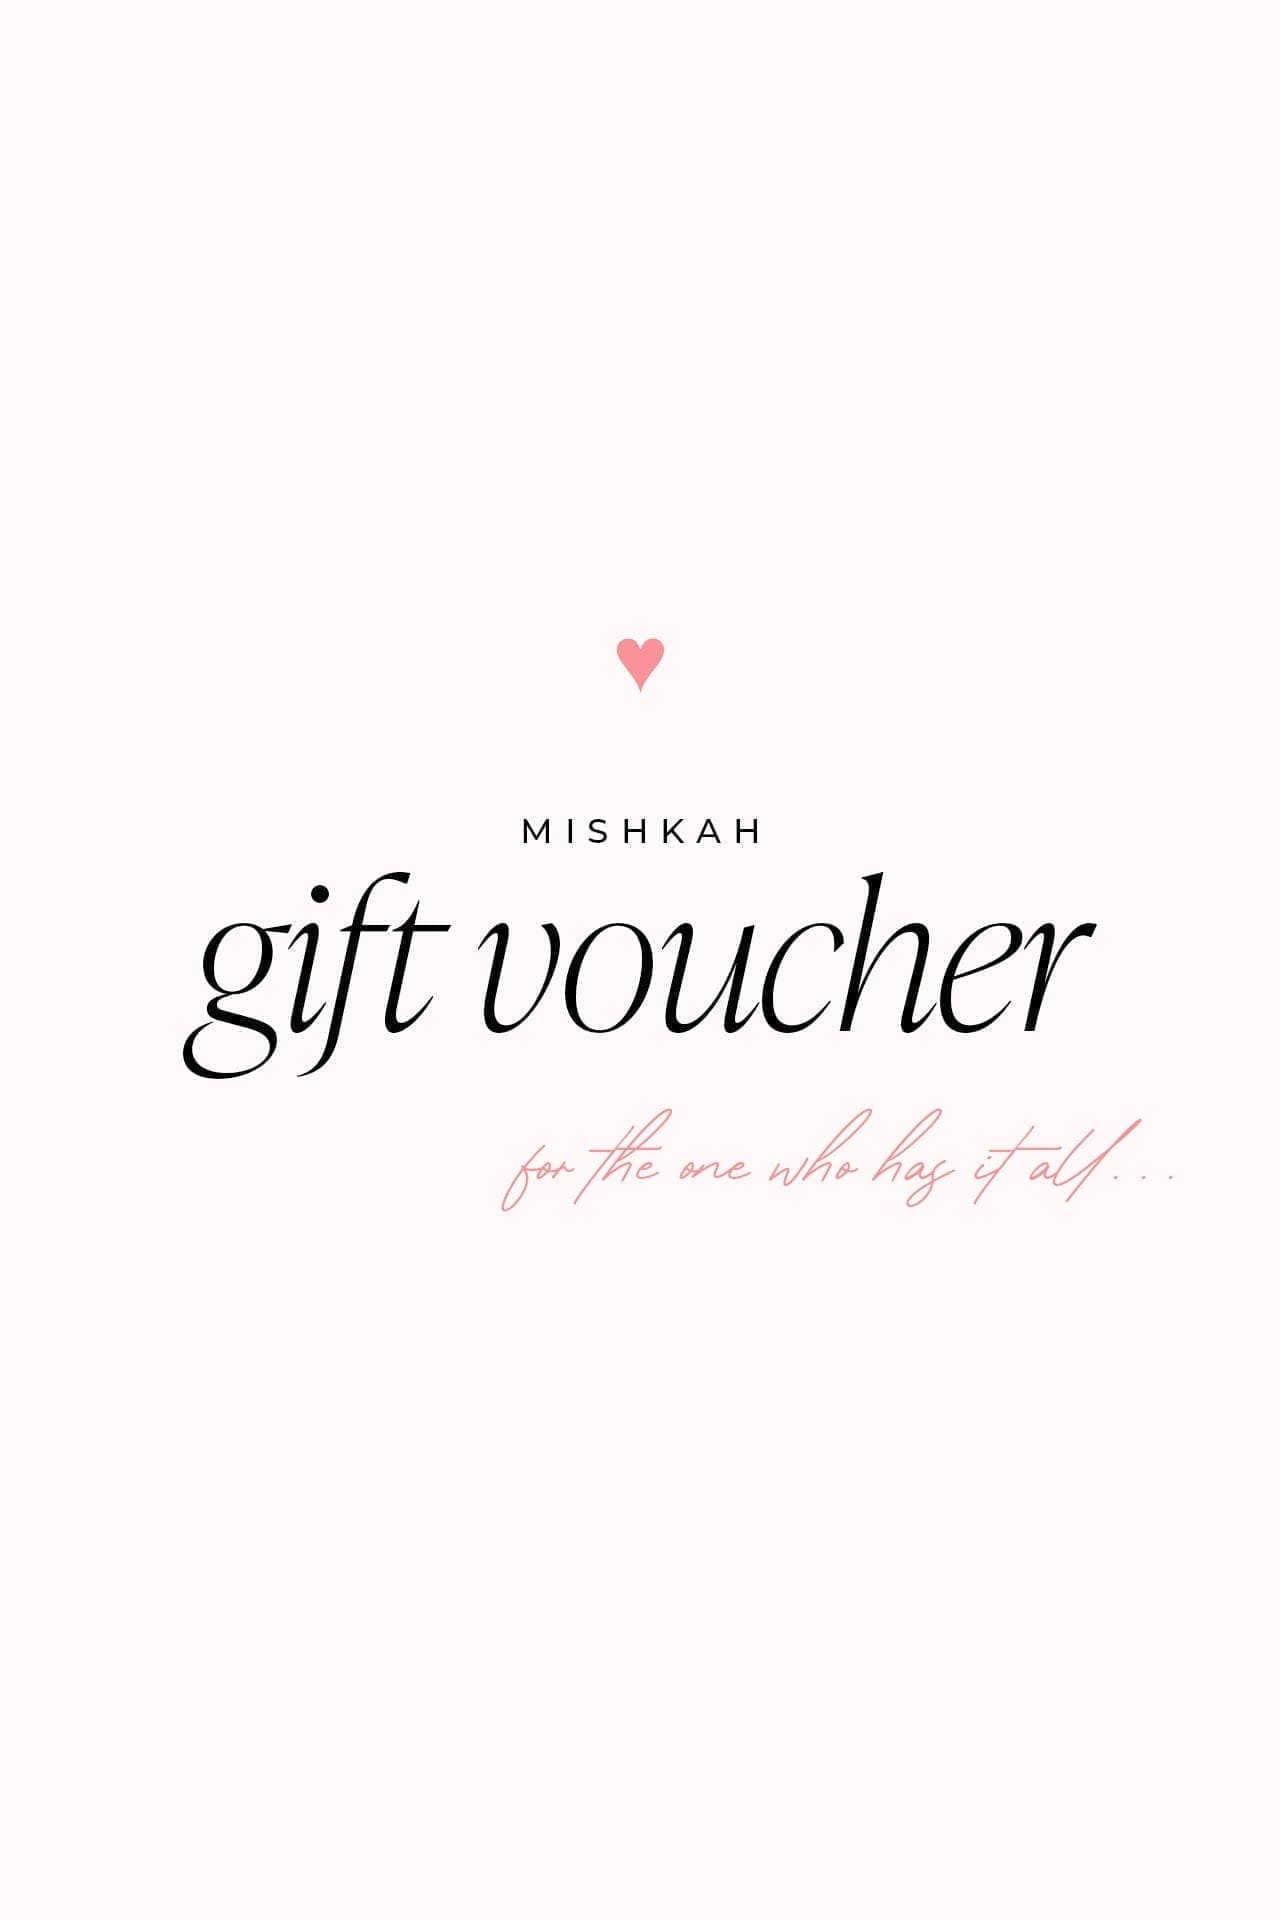 Gift Card, BIRTHDAY, GIFT, GIFT CARD, new arrivals, PRESENT, VOUCHER, Gift Card From Only $25.00 For That Special Girl, Are yo looking for that perfect present for that special woman in your life?
A Mishkah Gift Card can have a thousands of choices for her. Make her feel special today-MISHKAH